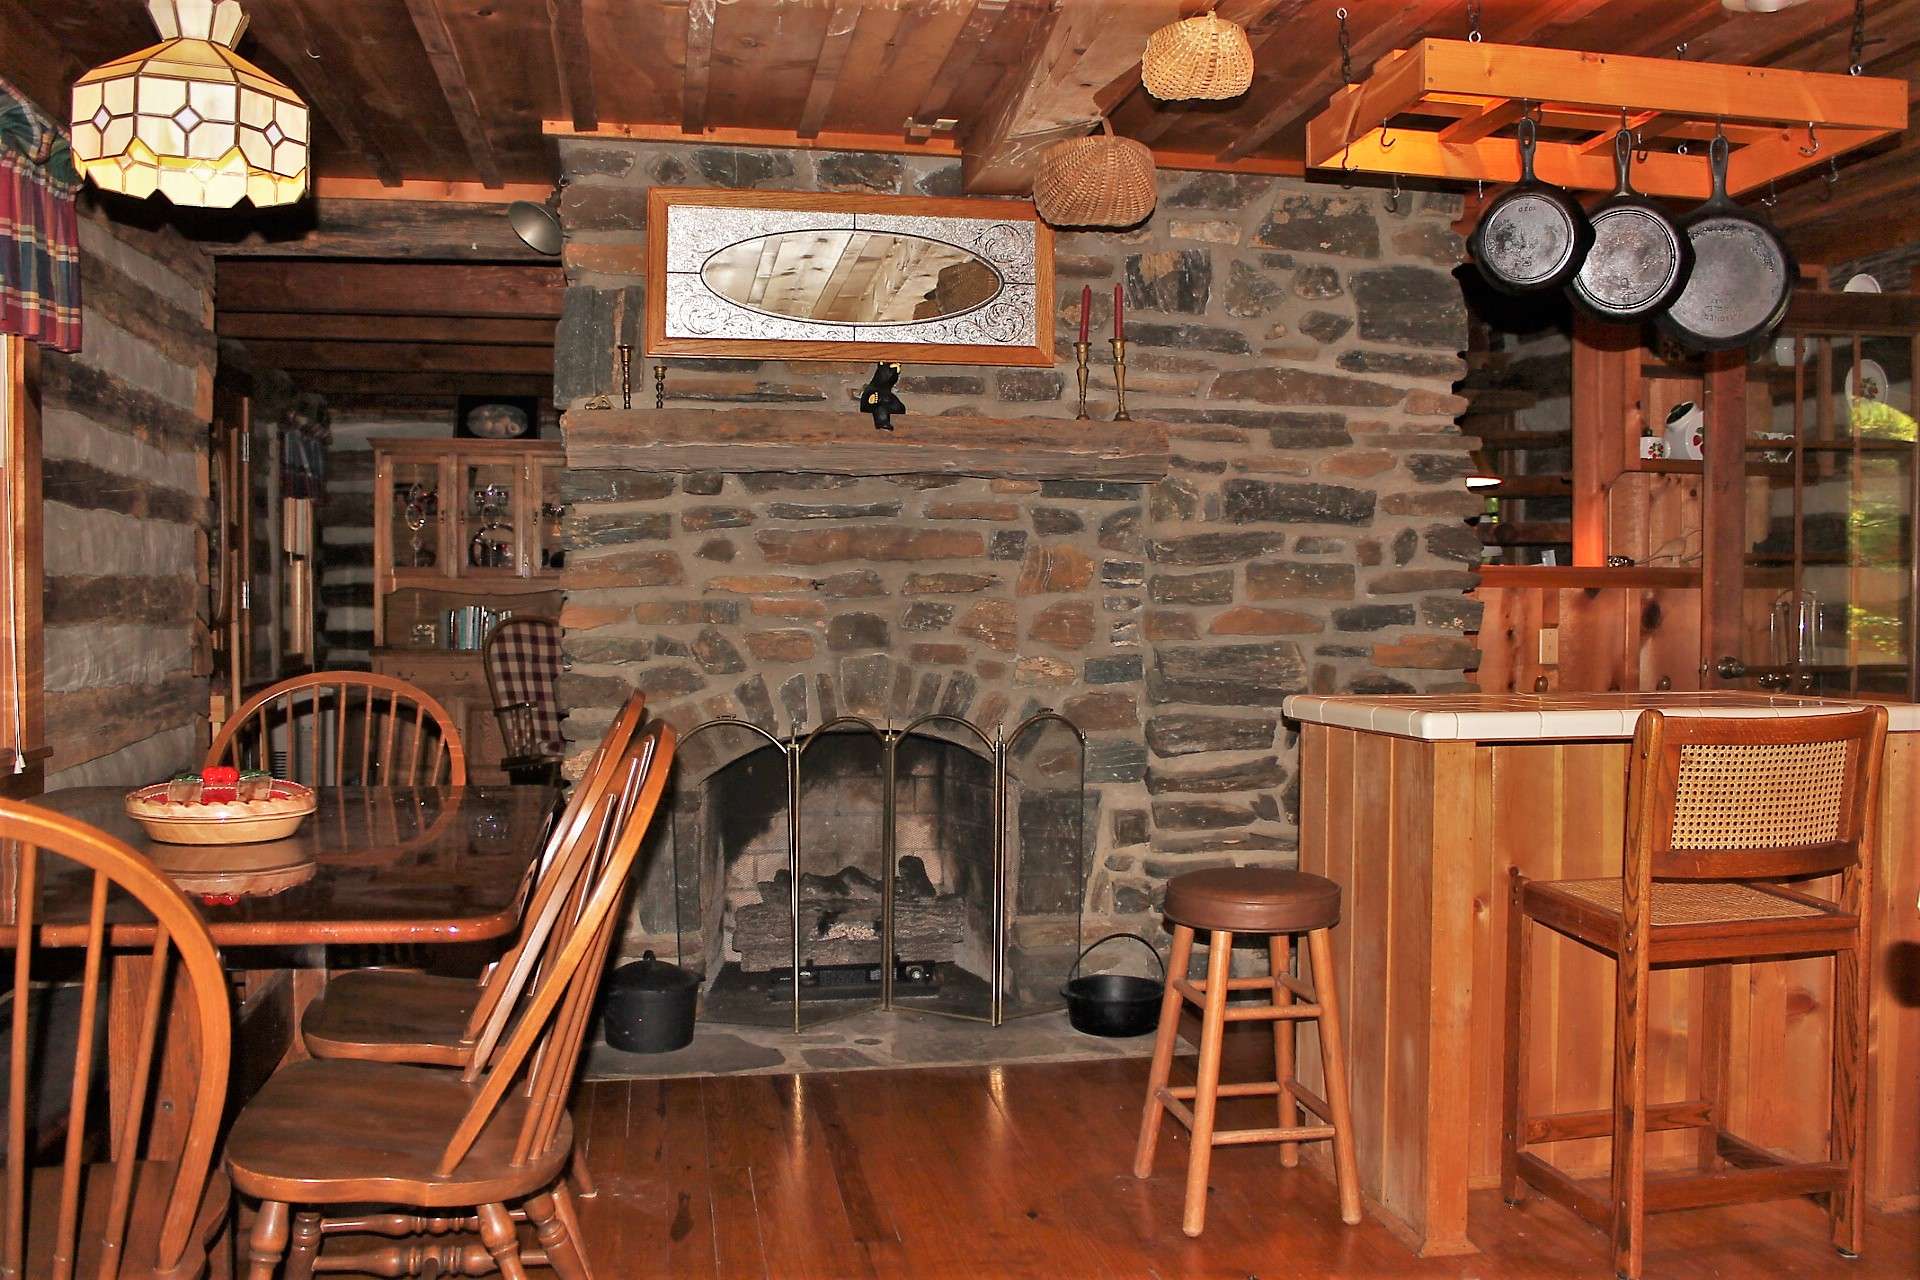 A gas fireplace provides just the right rustic ambiance for enjoying meals with loved ones.